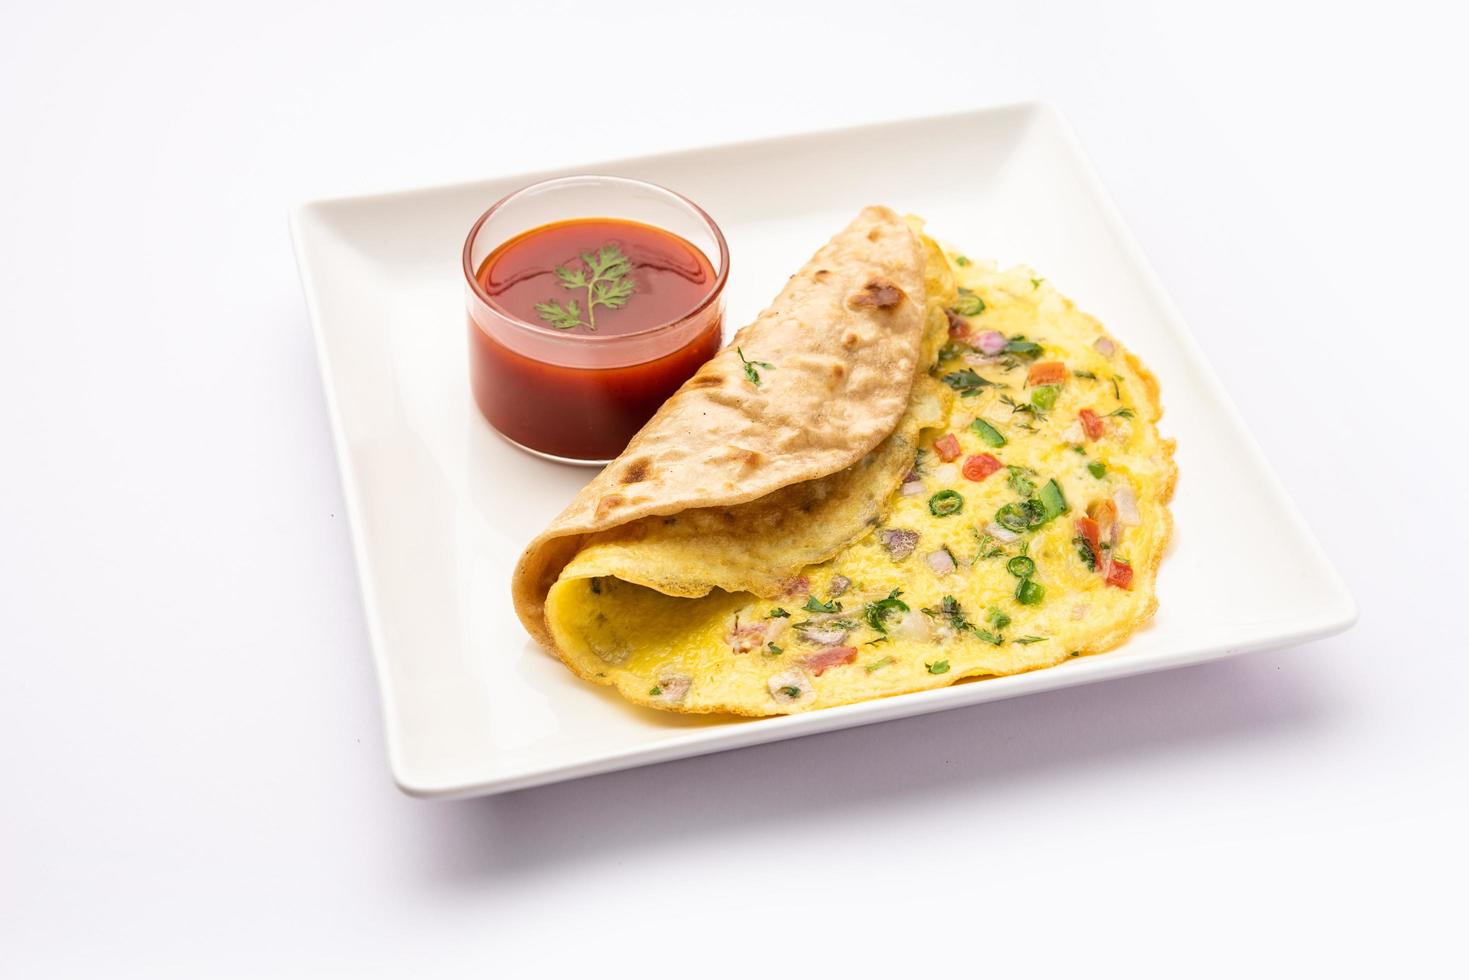 Omelette chapati roll or Franky. Indian Popular, quick healthy recipe for kid's tiffin or lunch box photo